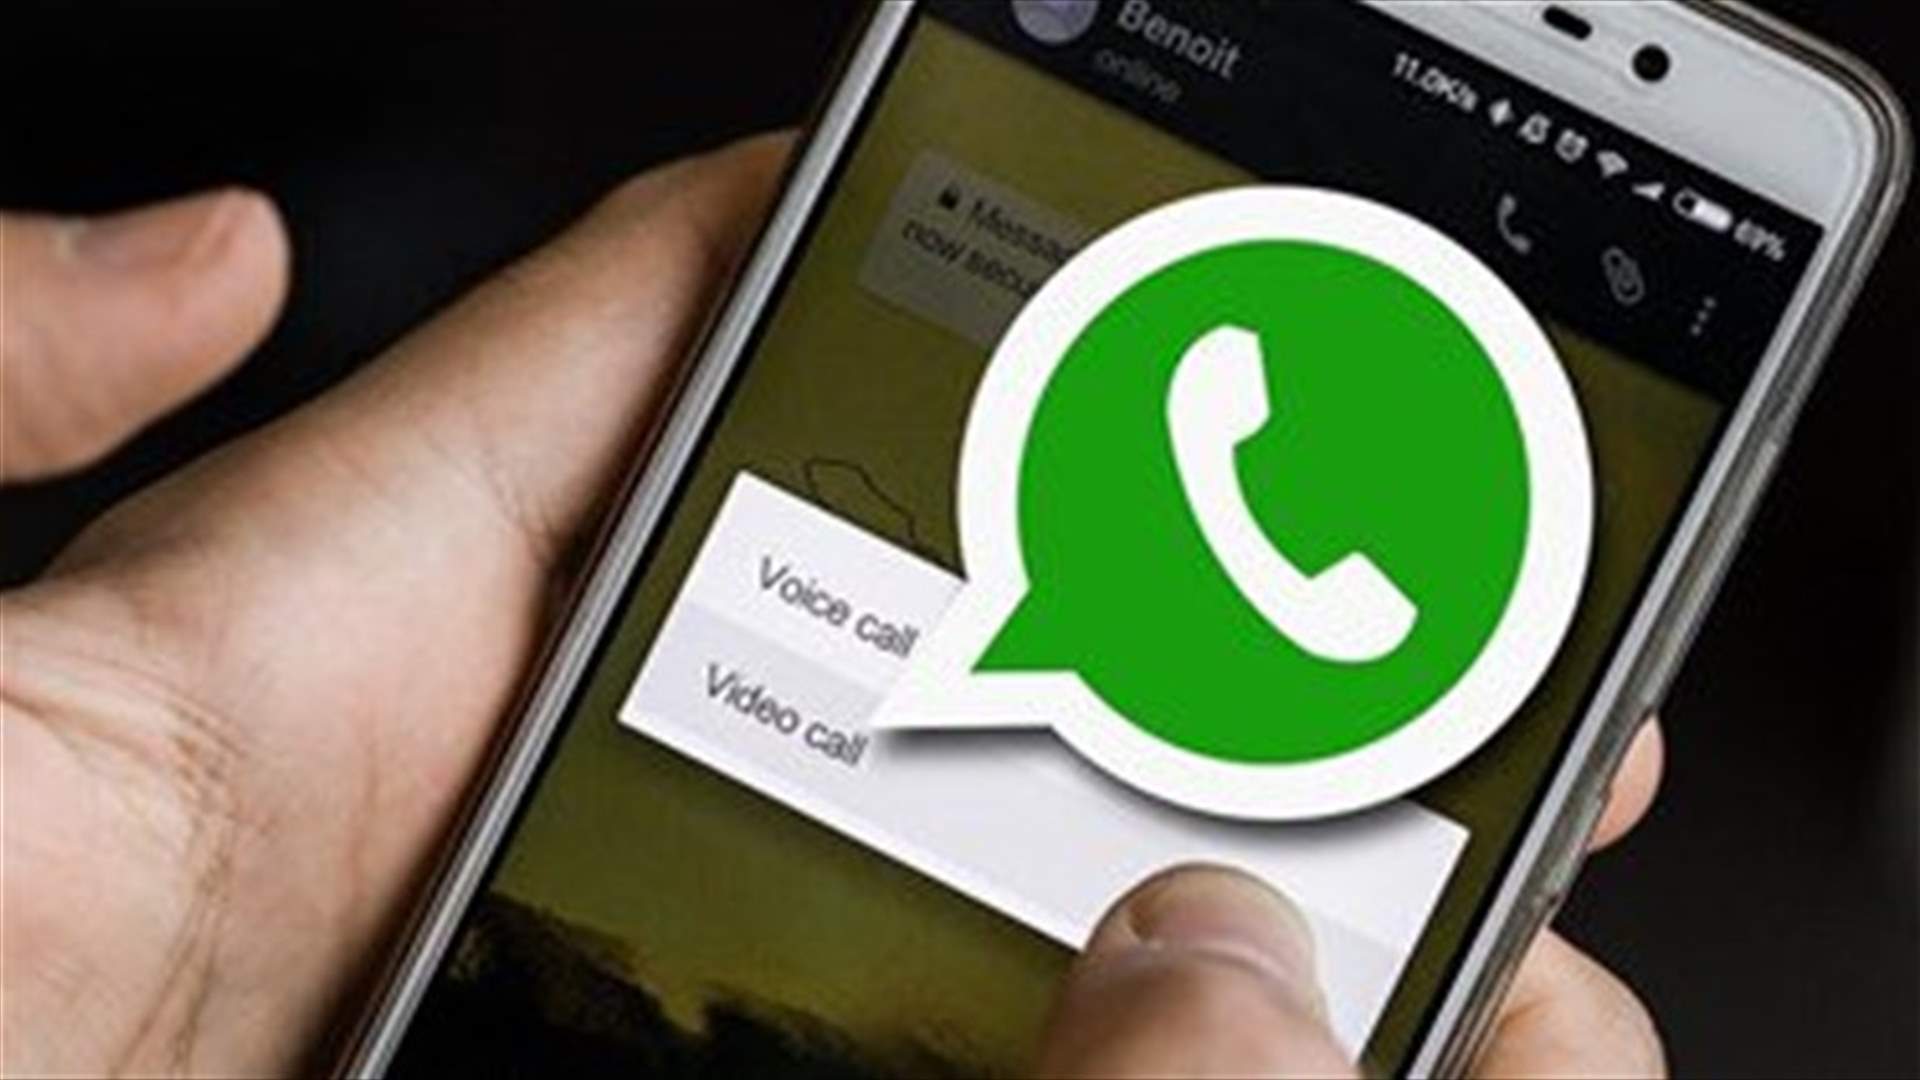 Telecommunications Ministry denies possible cancellation of Whatsapp call service